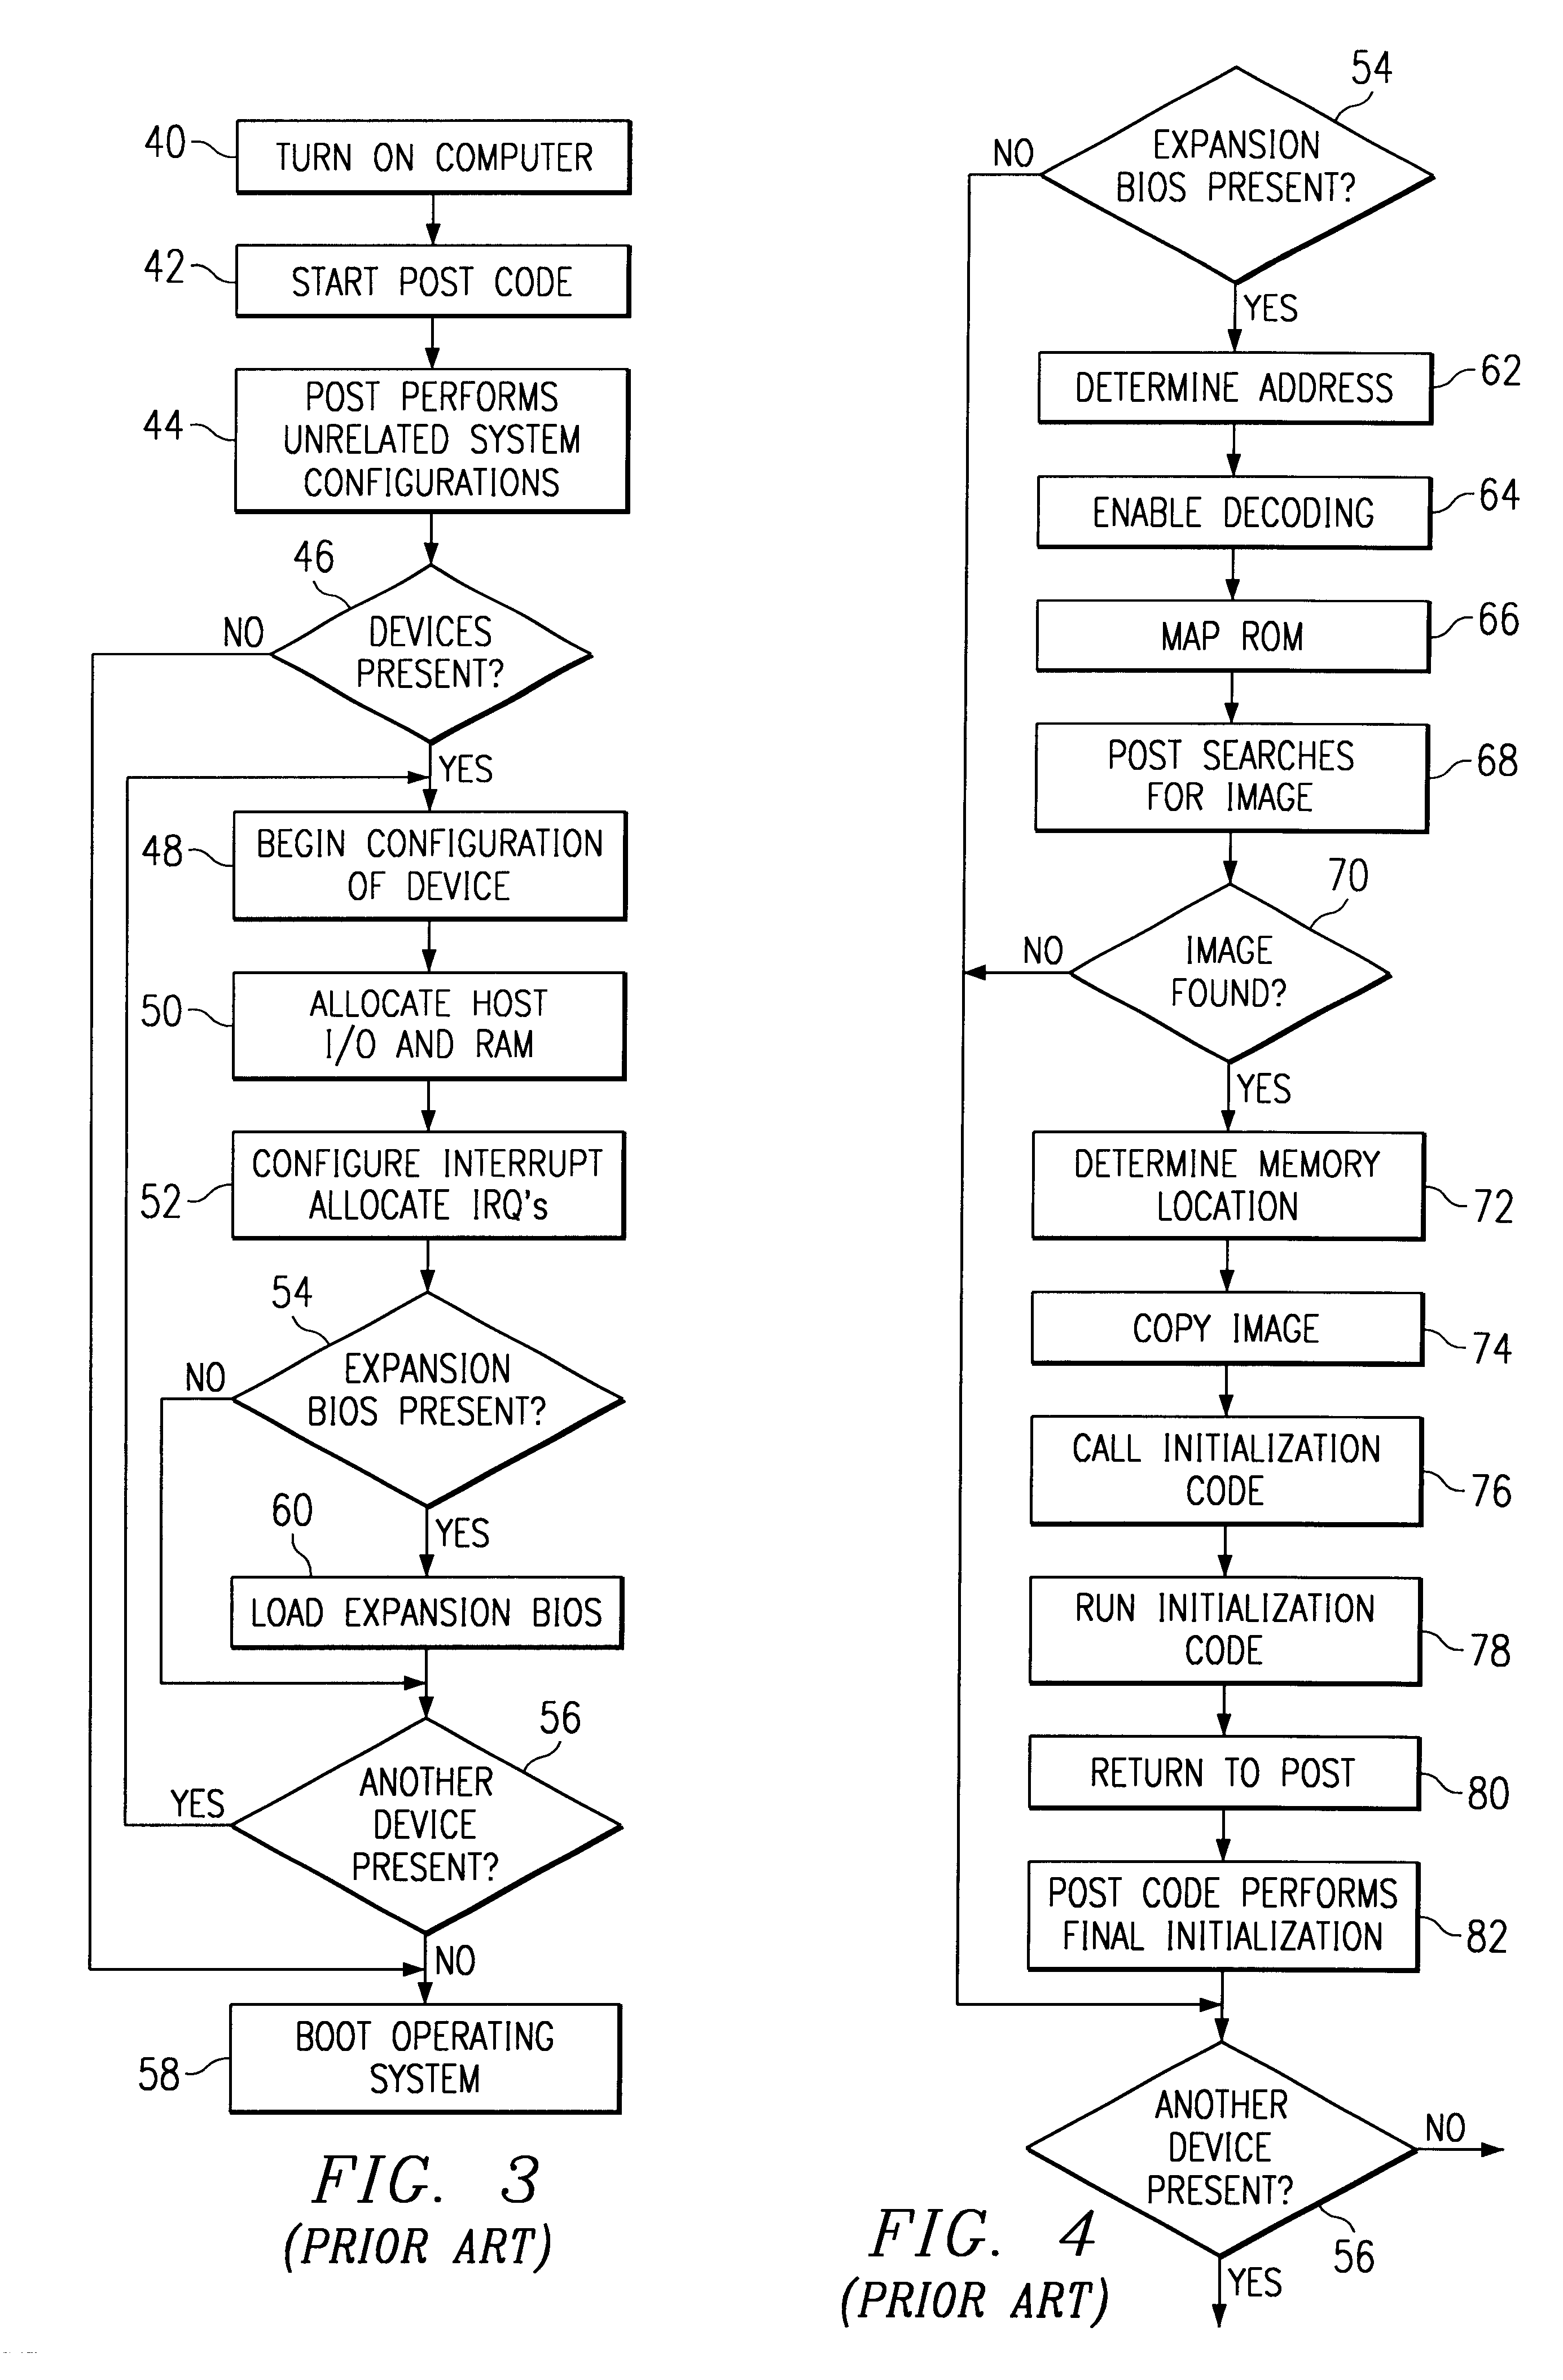 Storing system-level mass storage configuration data in non-volatile memory on each mass storage device to allow for reboot/power-on reconfiguration of all installed mass storage devices to the same configuration as last use